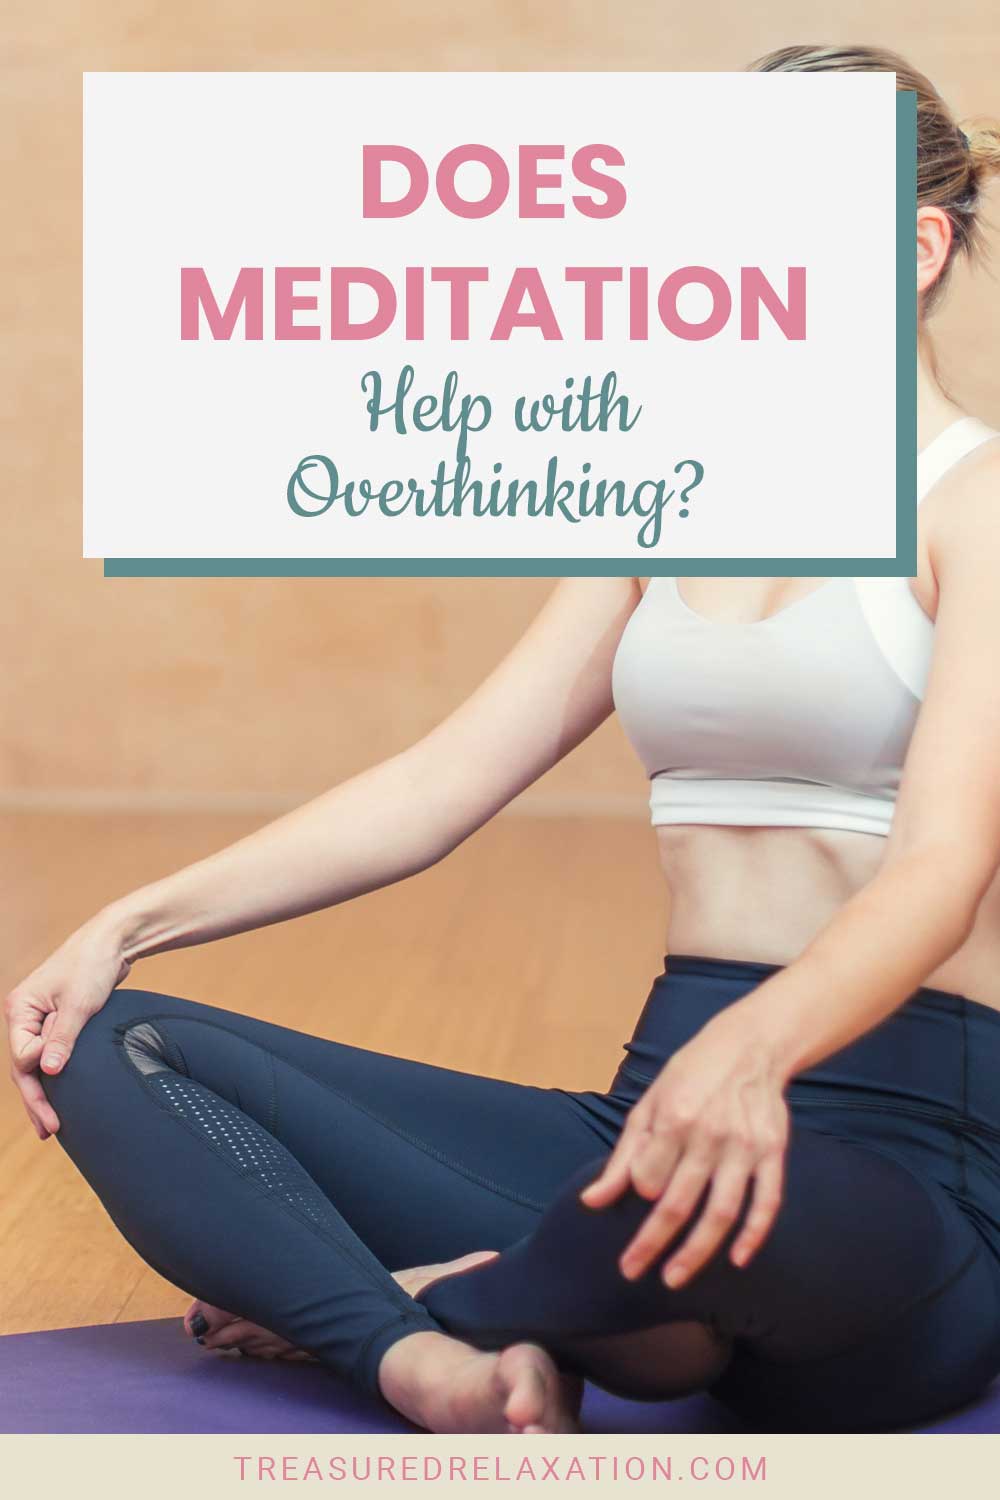 Does Meditation Help with Overthinking?